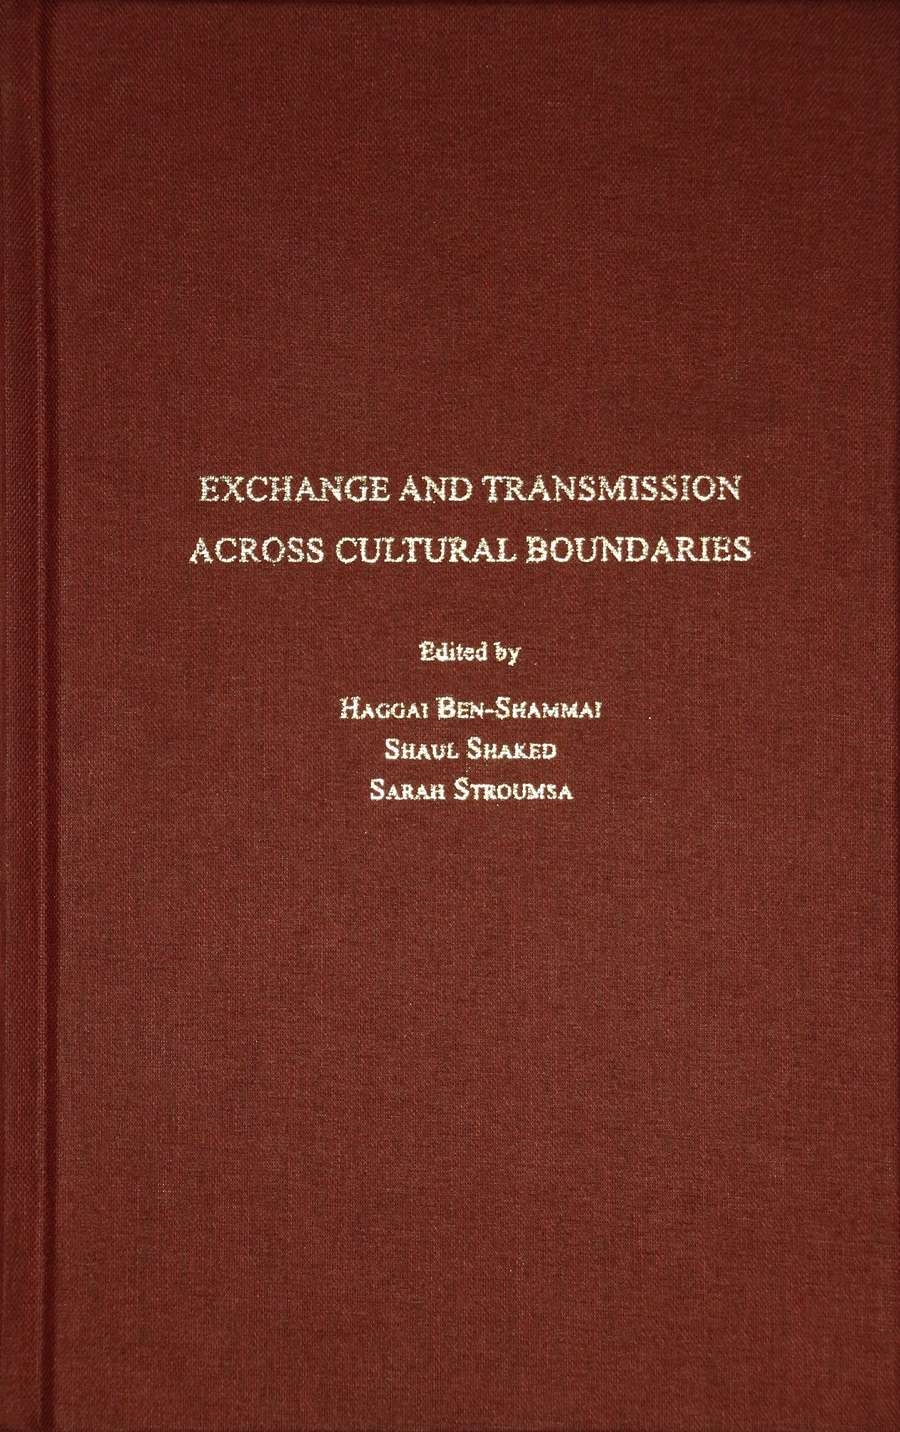 Exchange and Transmission across Cultural Boundaries